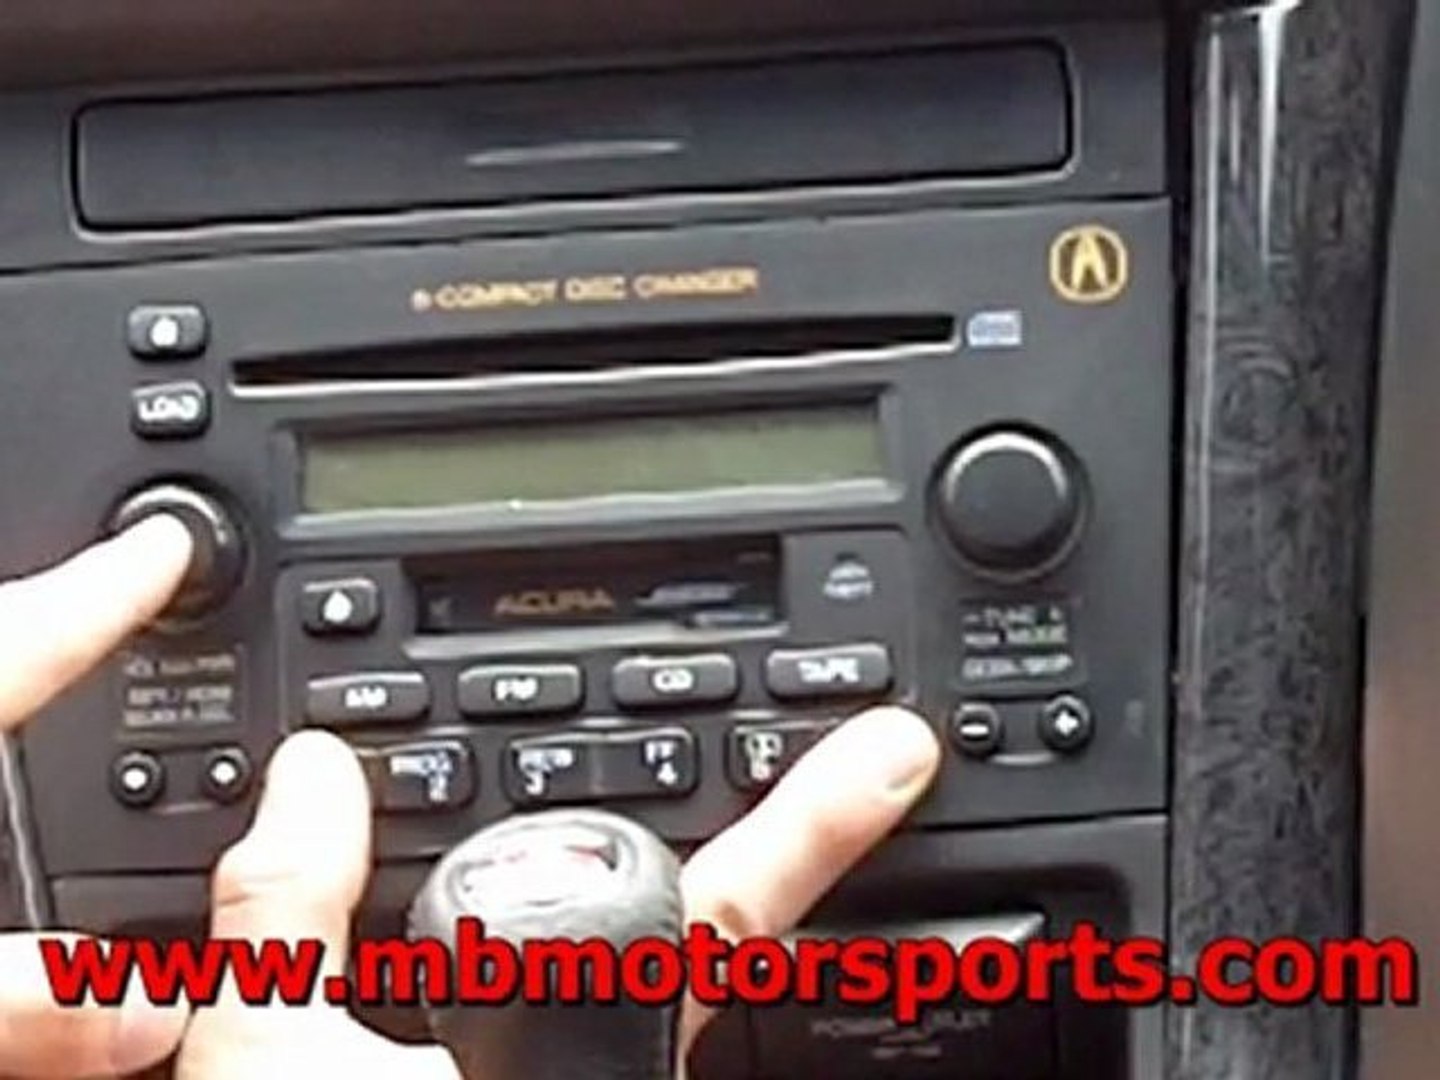 How To Reset Radio Security Code Acura CL | MB Motorsports - video  Dailymotion